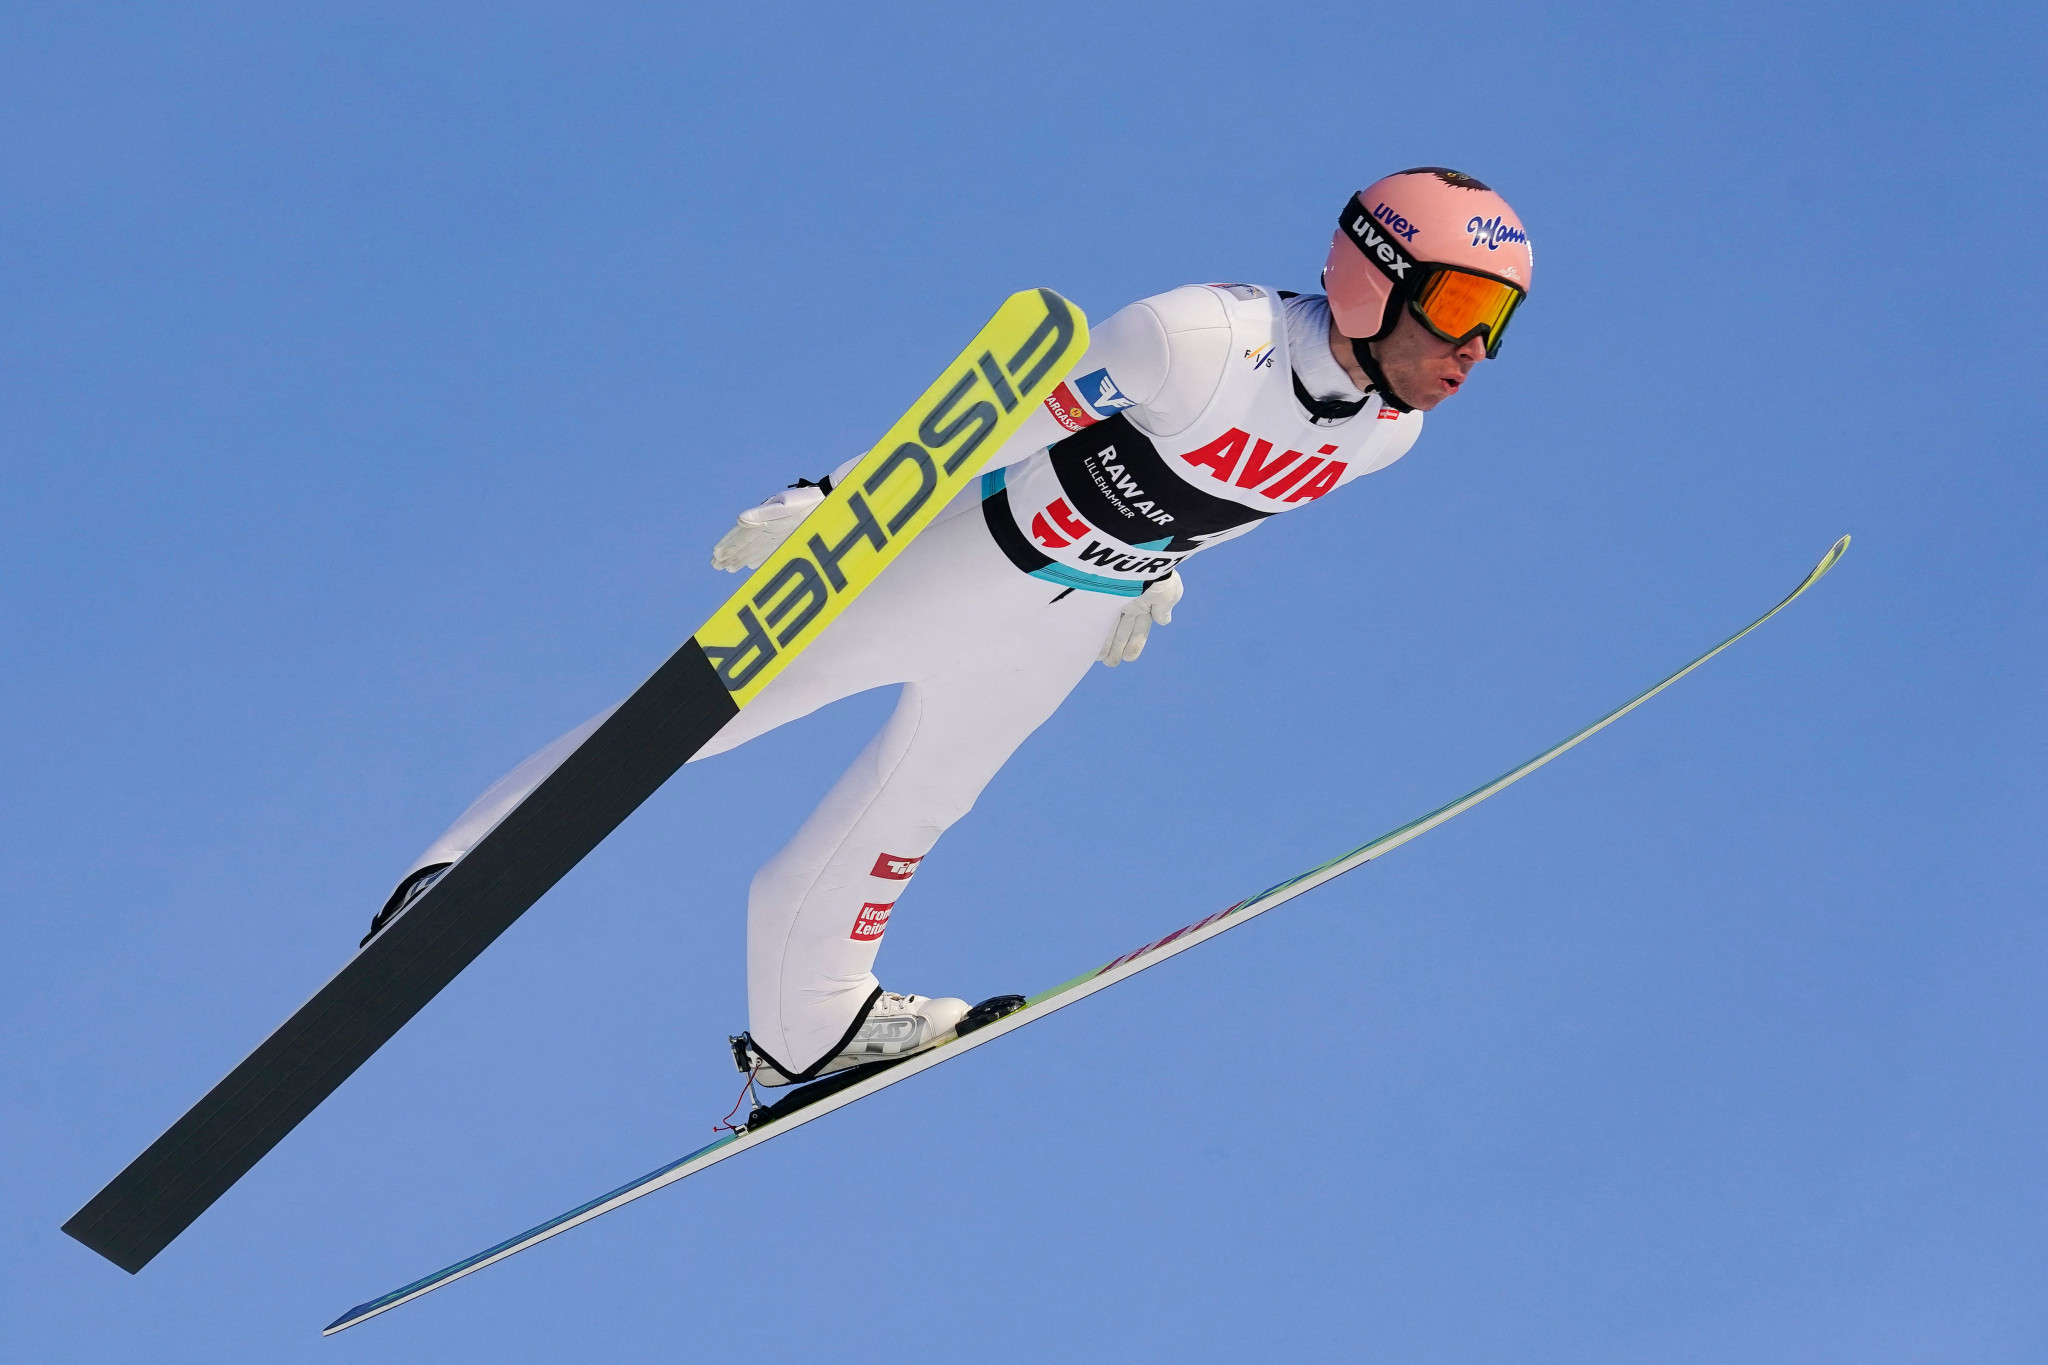 Stefan Kraft recorded the best jump of the day ©Getty Images